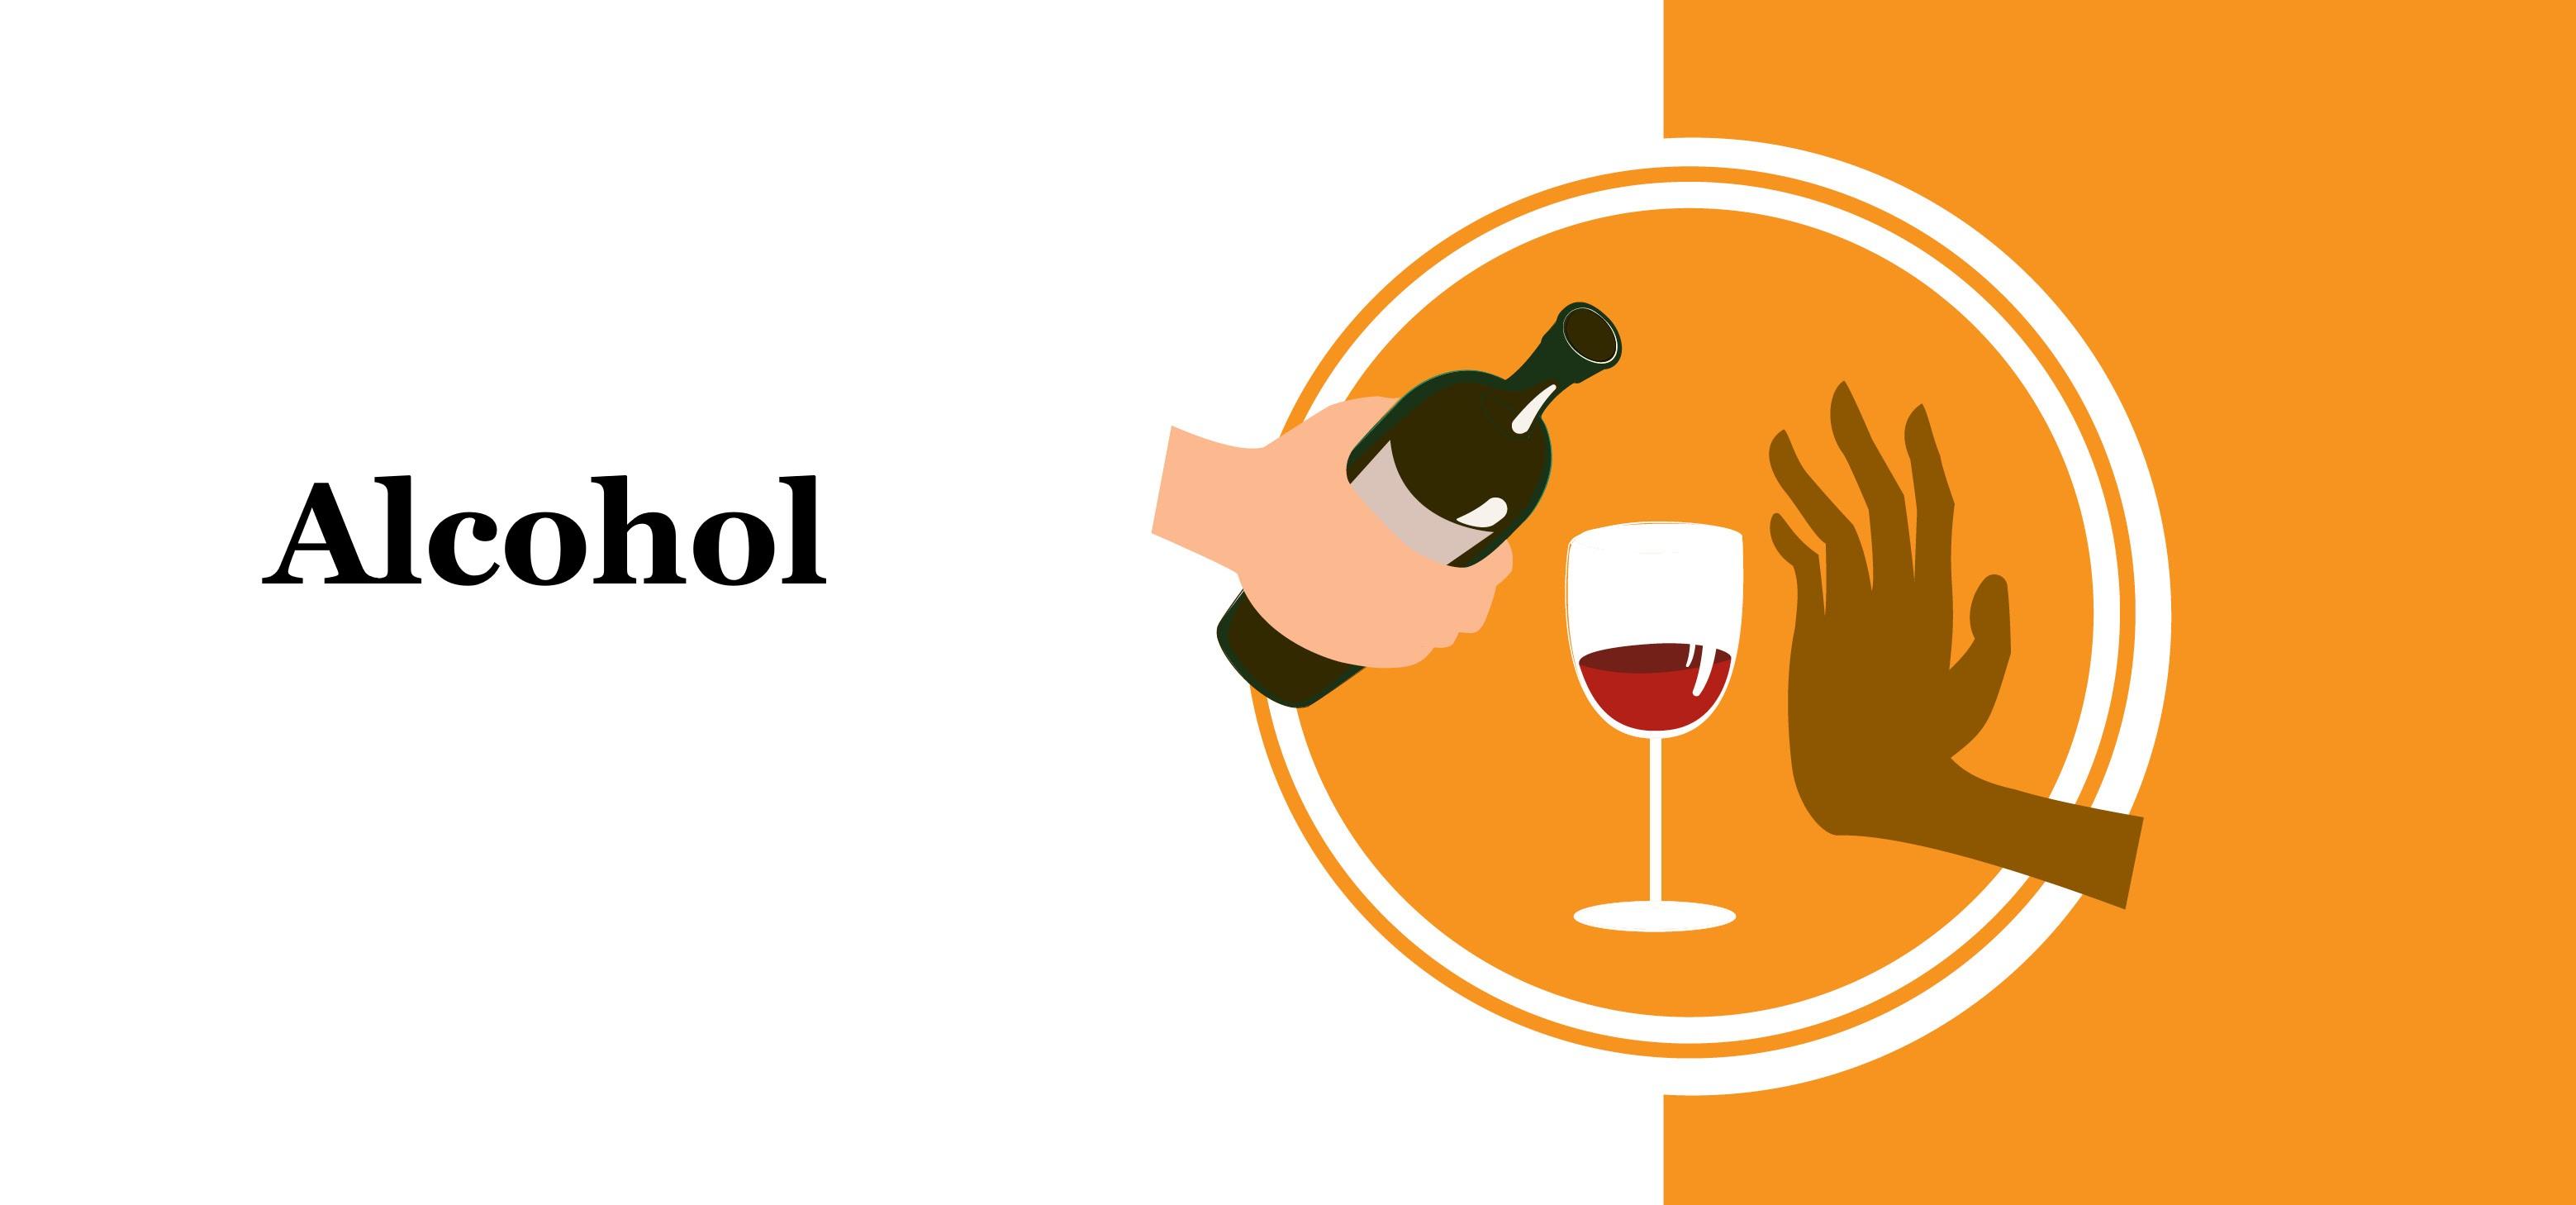 Alcohol - healthy fingal